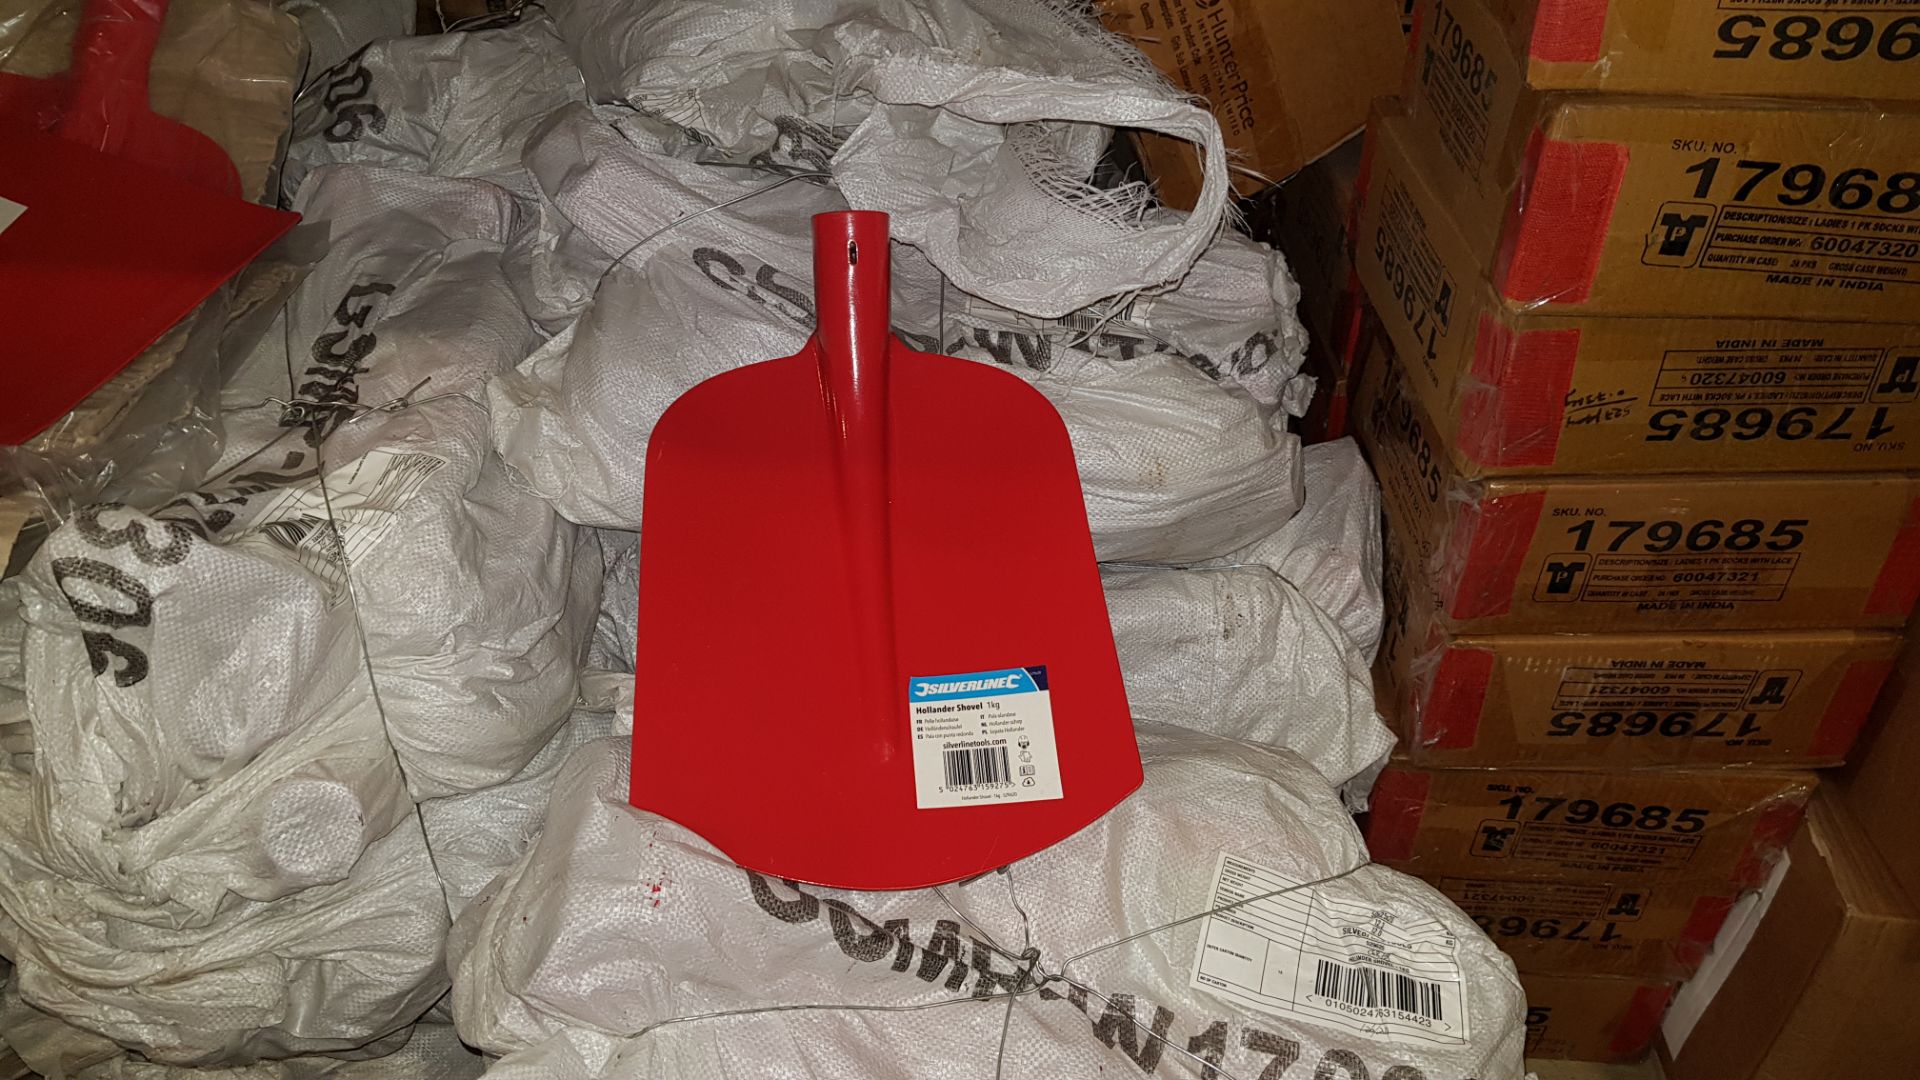 36 X BRAND NEW SILVERLINE RED HOLLANDER SHOVEL - IN 3 BAGS